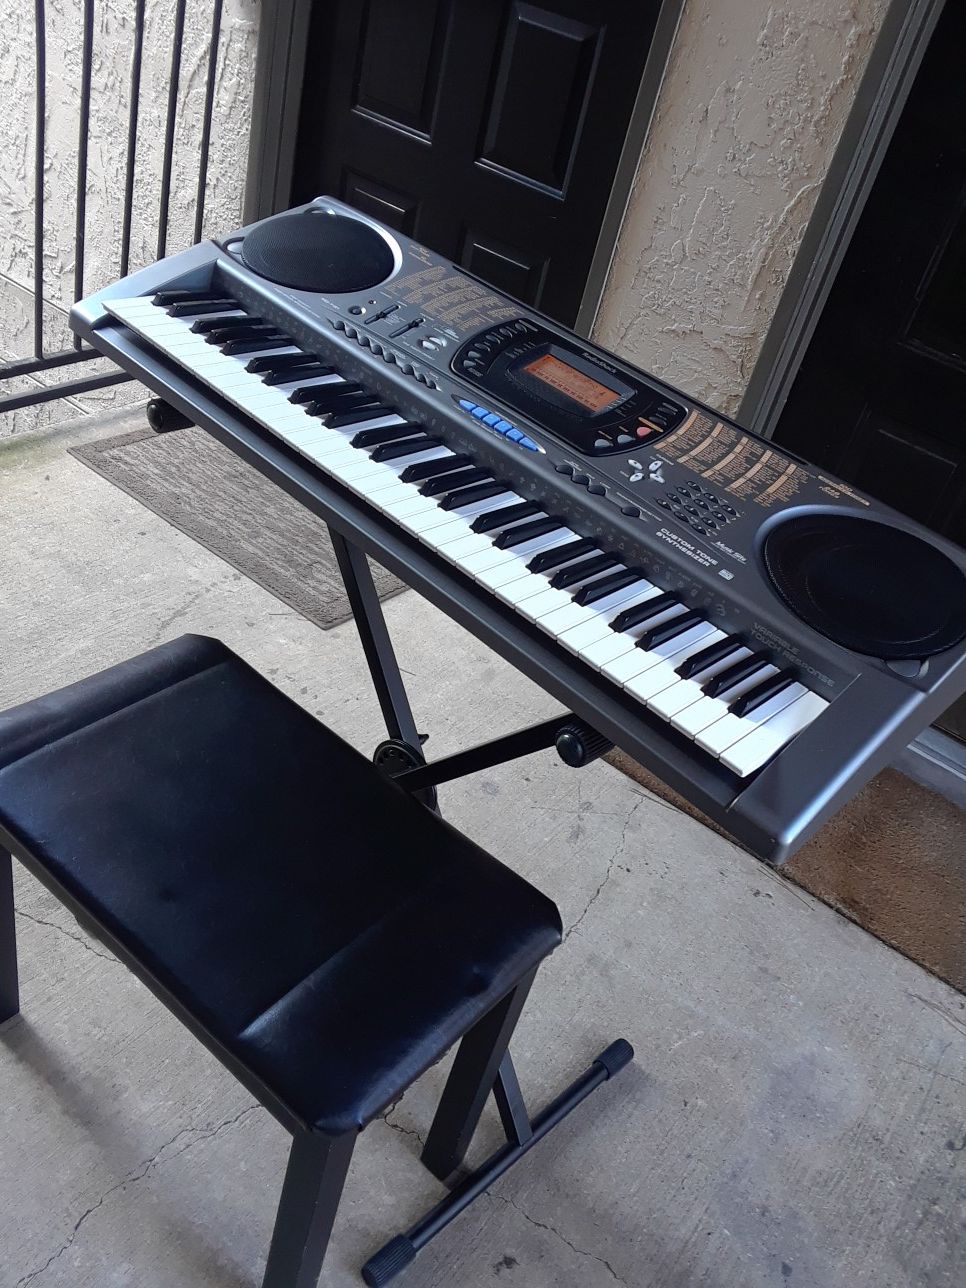 61 KEY HIGH QUALITY KEYBOARD SET. GREAT SOUND VOLUME WITH POWERFUL SPEAKERS.